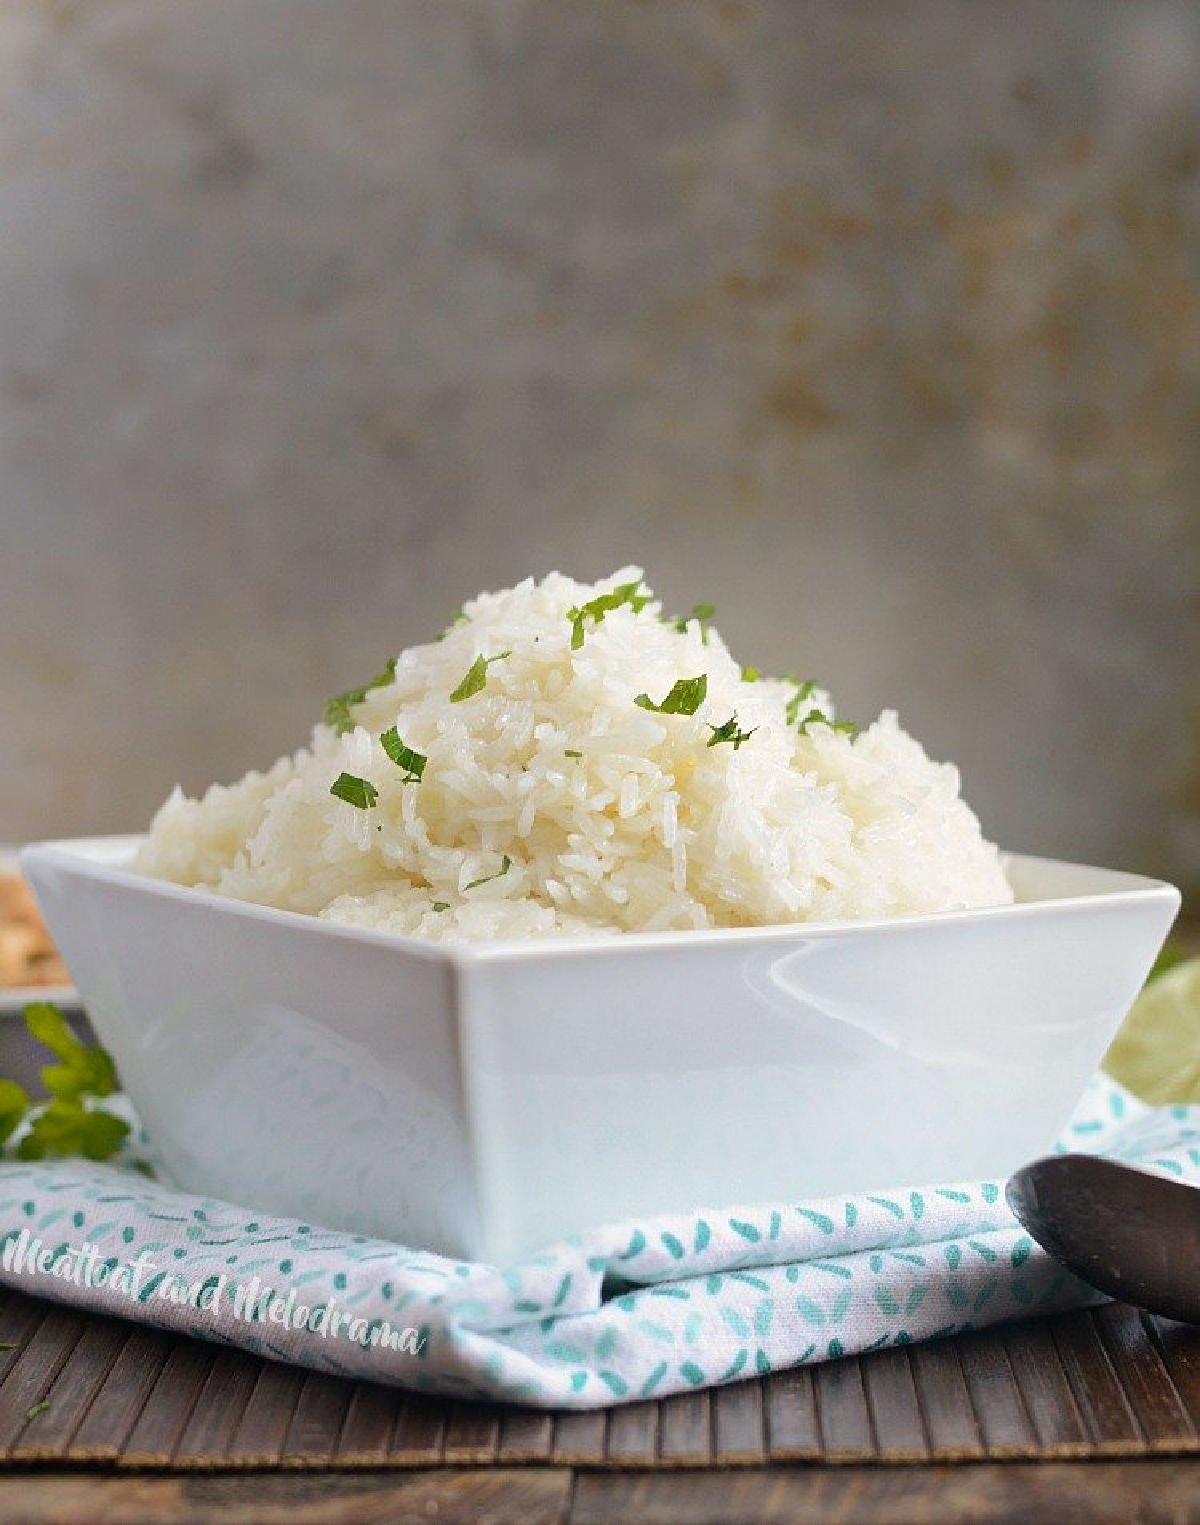 How to Make Thai Jasmine Rice on the Stovetop